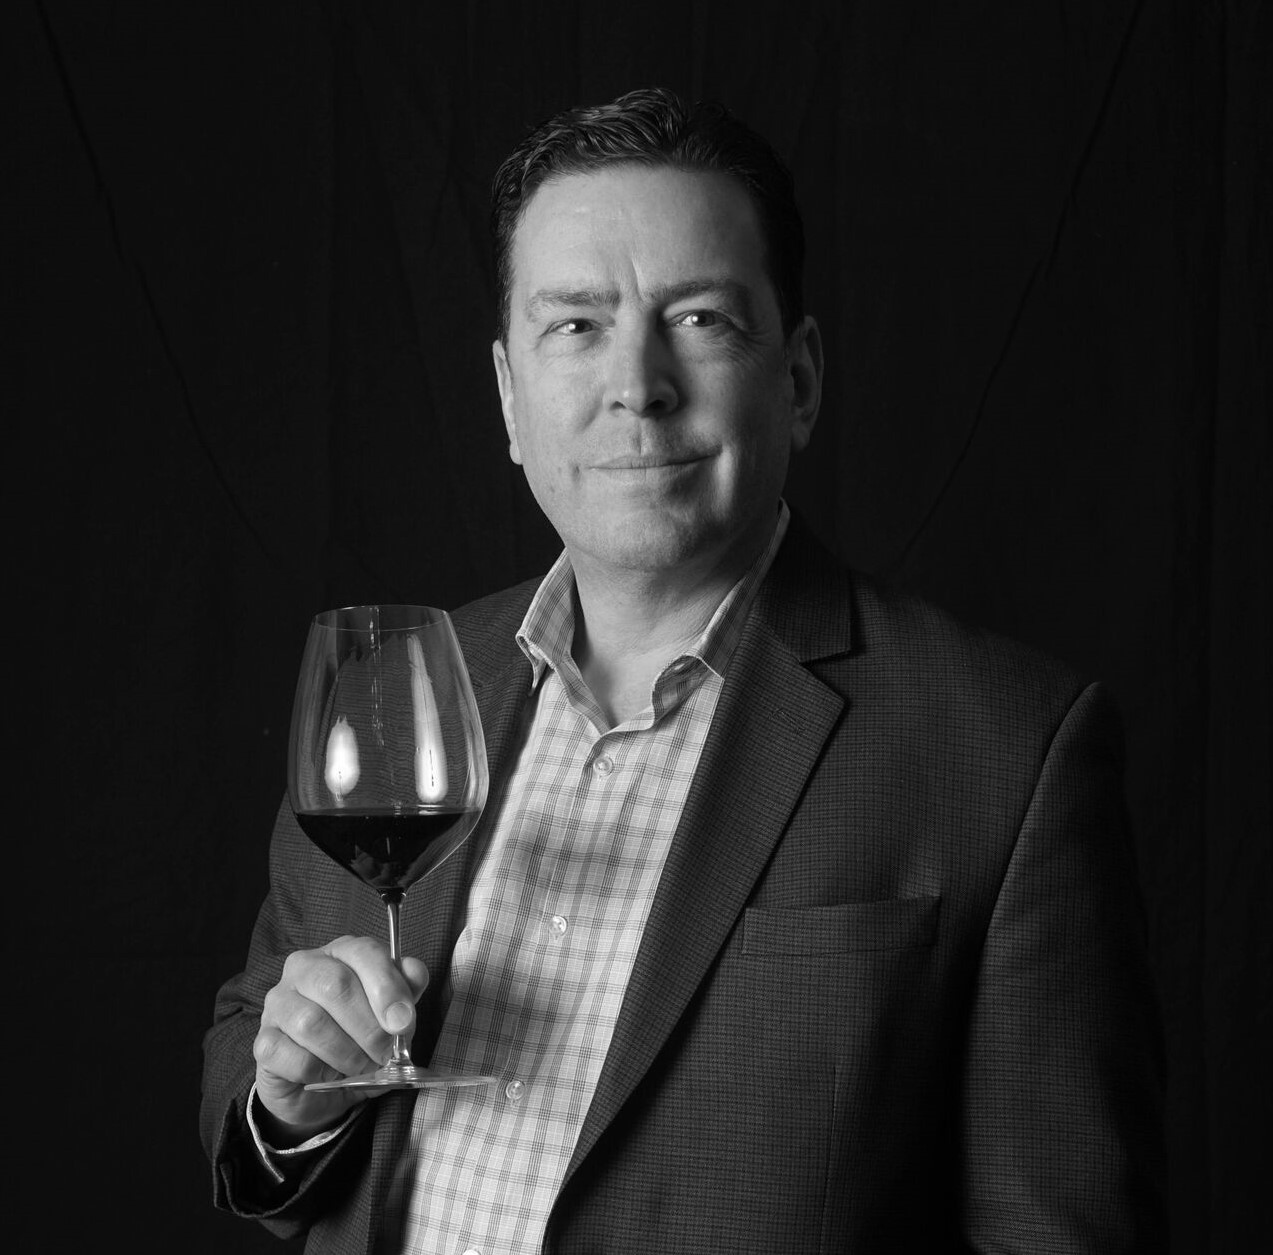 A black and white photo of Lars Leicht holding a glass of wine.